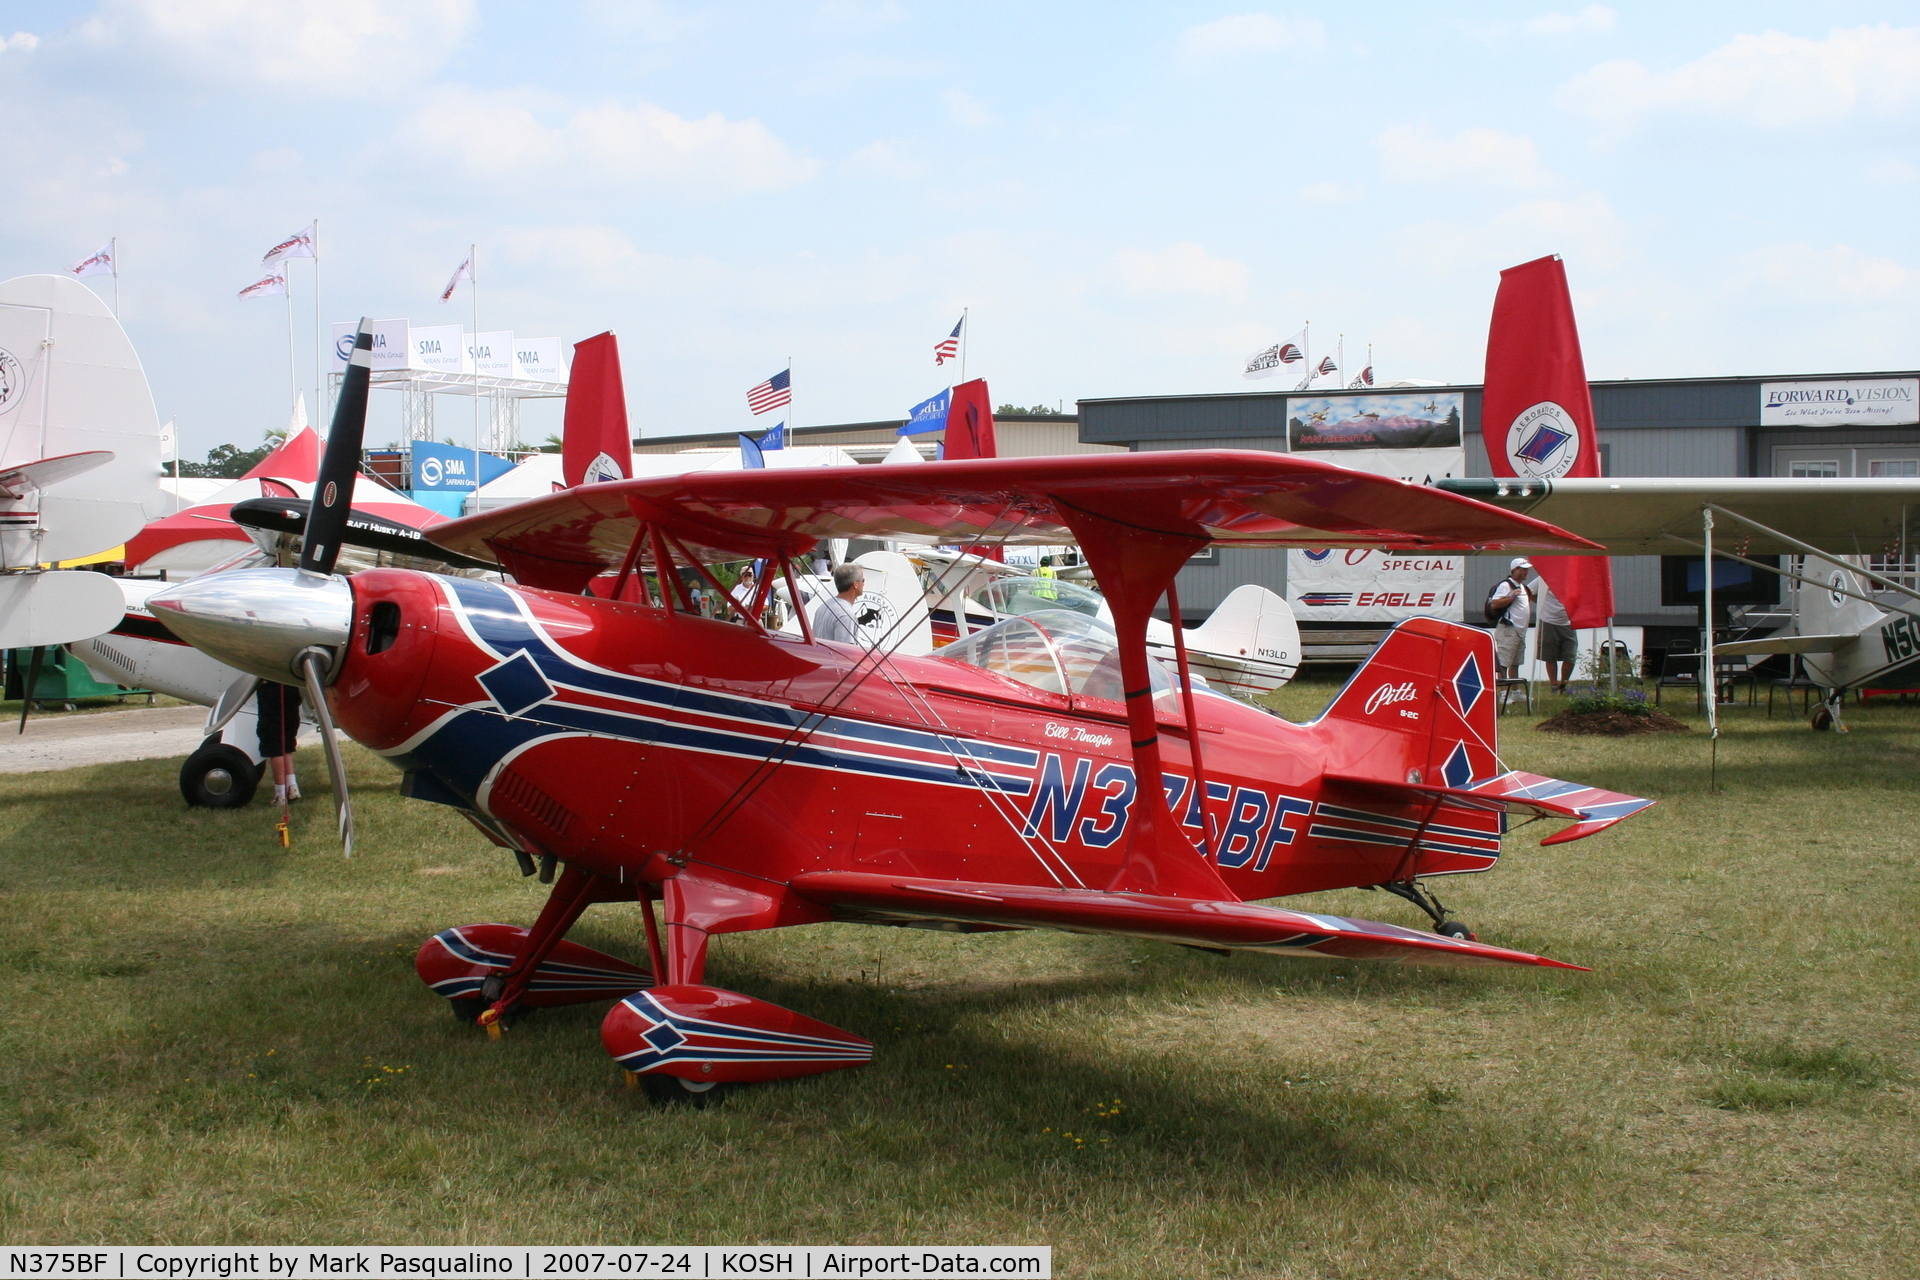 N375BF, 2005 Aviat Pitts S-2C Special C/N 6071, S-2C